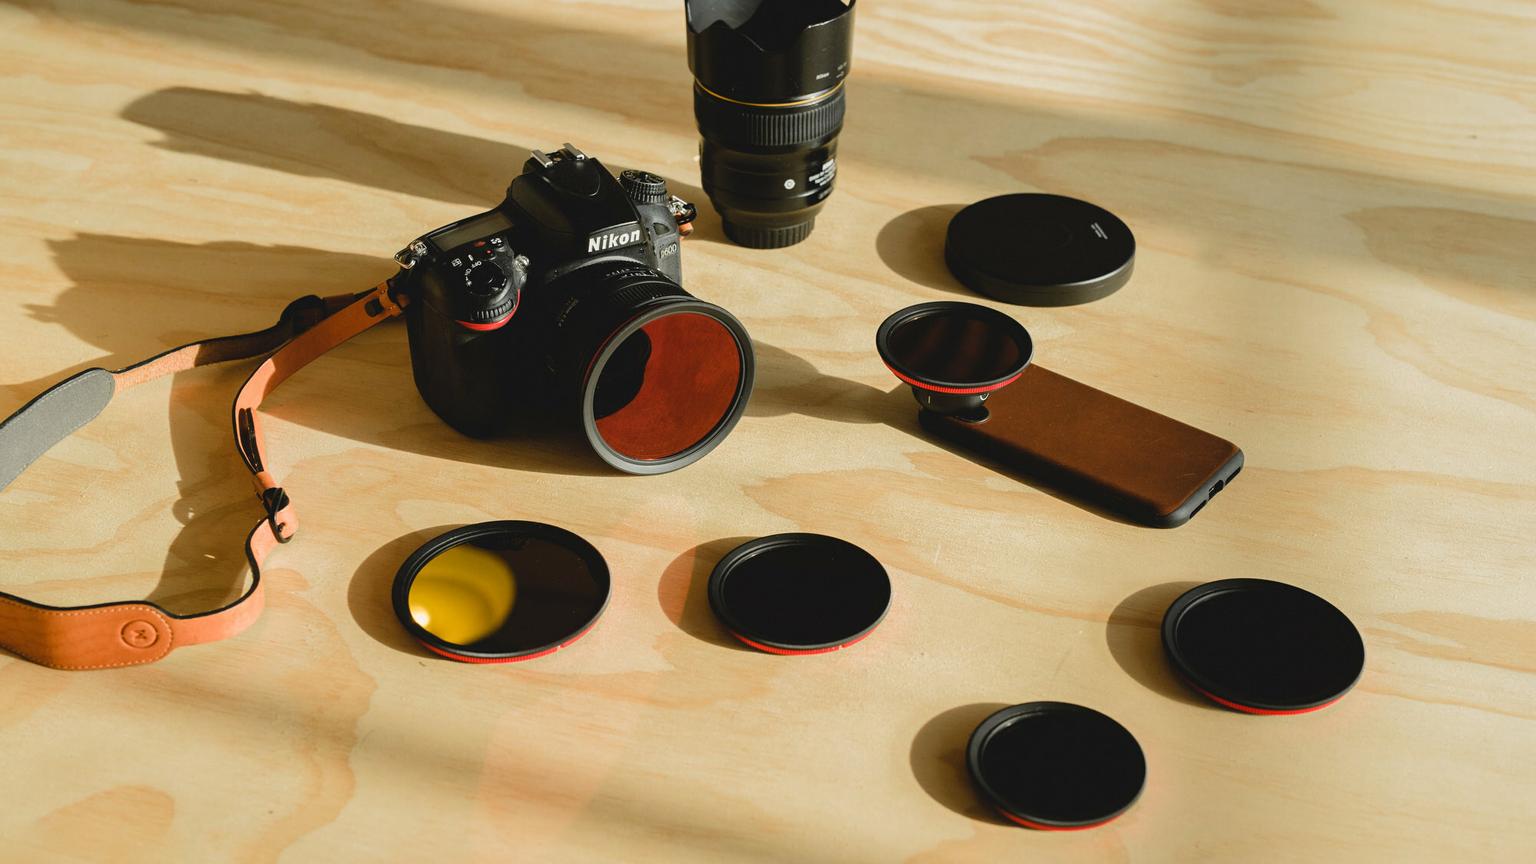 Moment VND Filters in various sizes with dark lighting - Moment CineClear UV snap-on filter lifestyle image in nature - Article called "The Ultimate Guide To Camera Filters and Filter Adapters"